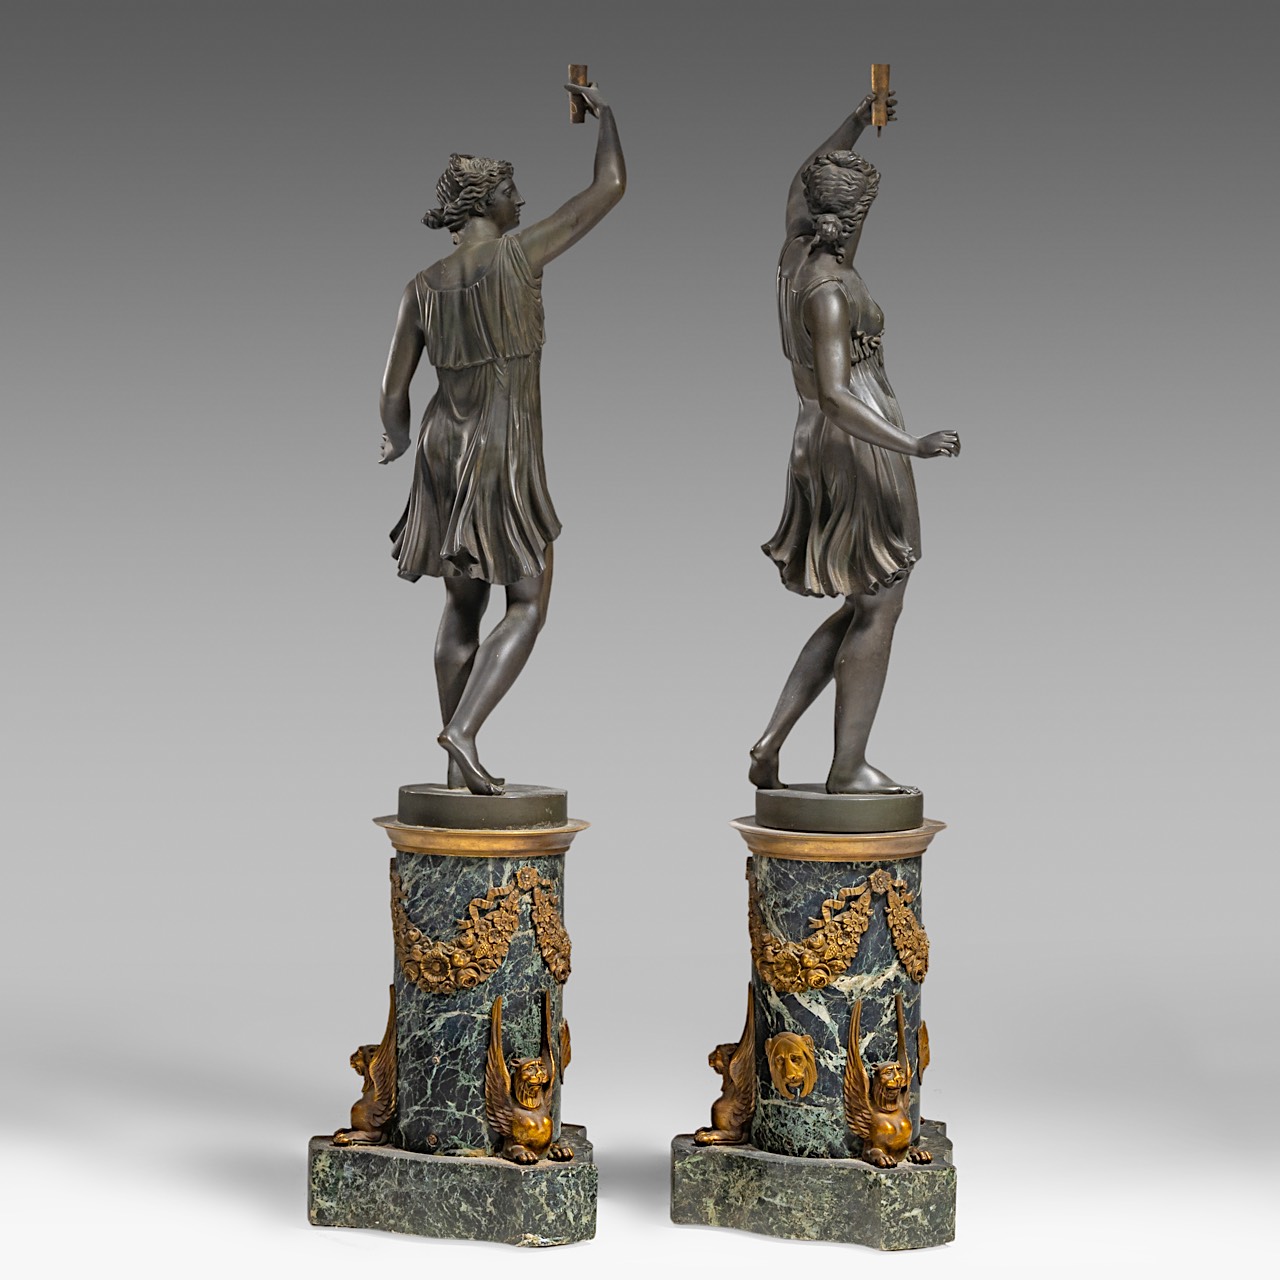 A pair of Empire style patinated bronze and vert de mer marble figural sculptures, H 86 cm - Image 4 of 6